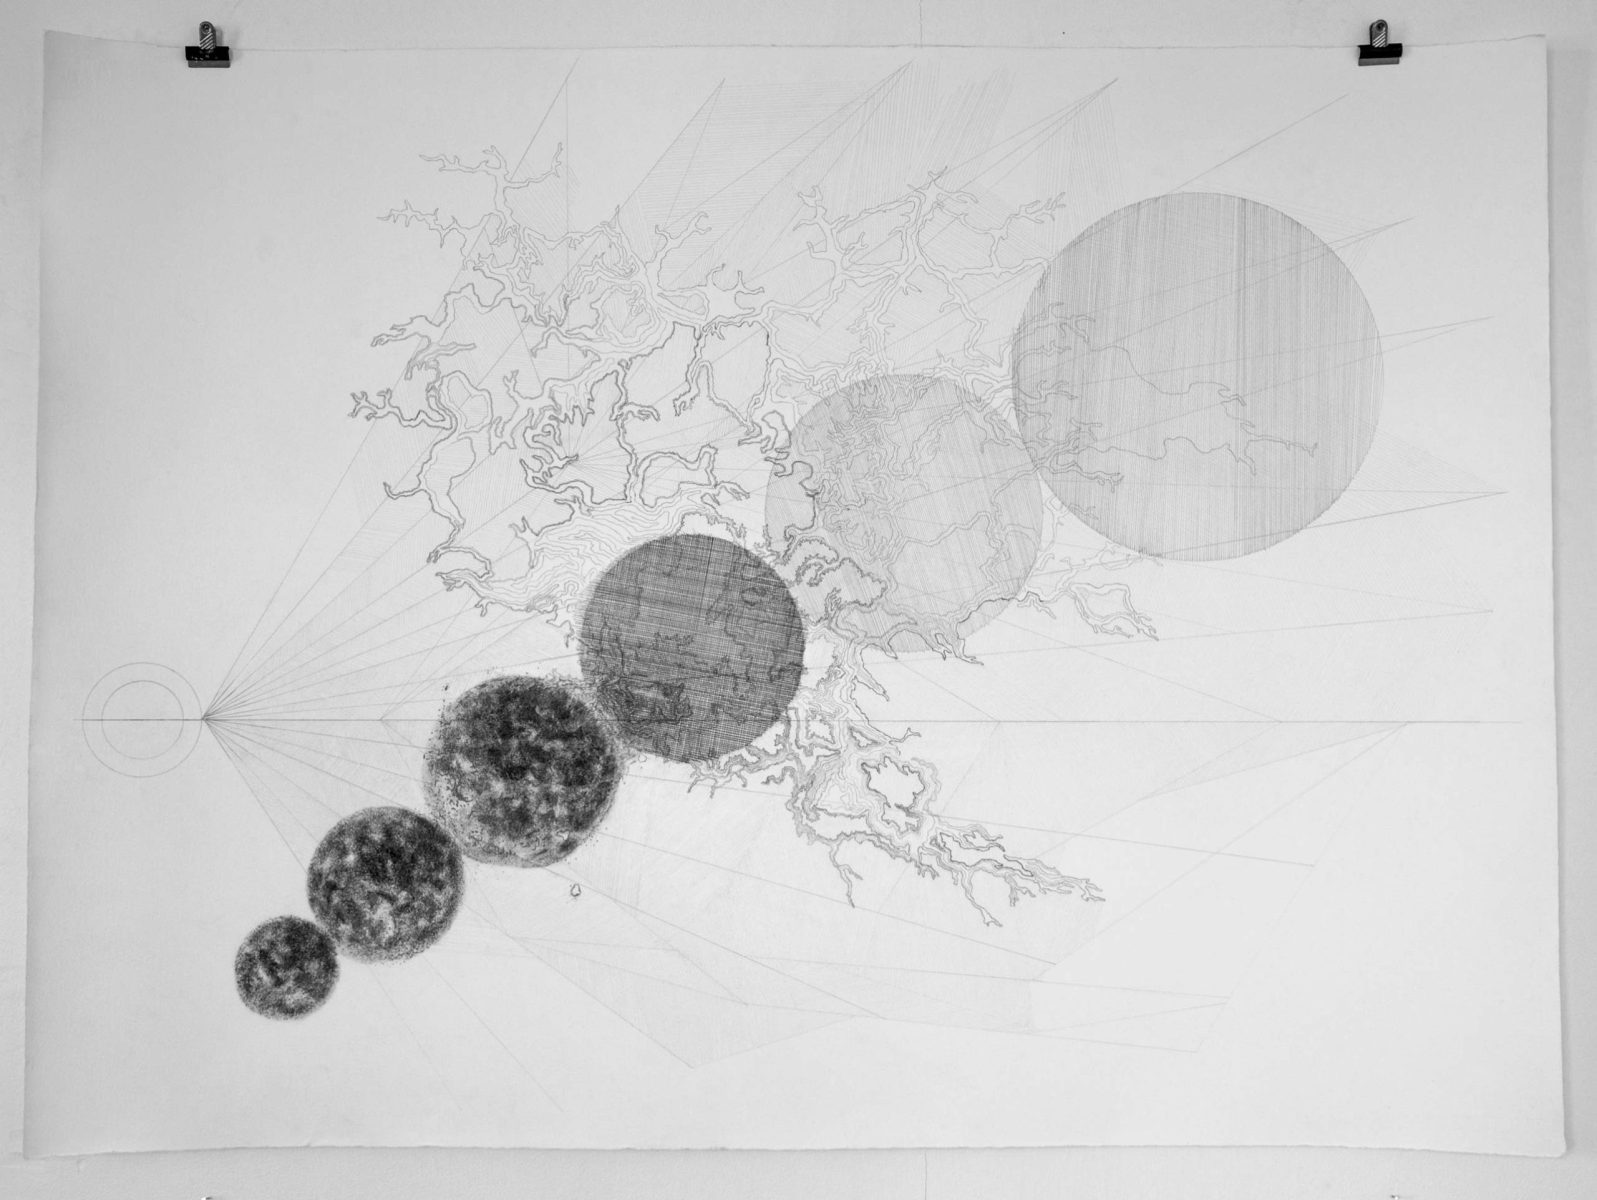 Karta, teckning med blyerts.Map, drawing with pencil. Size: 106x74 cm. 2021 © Annelie Wallin